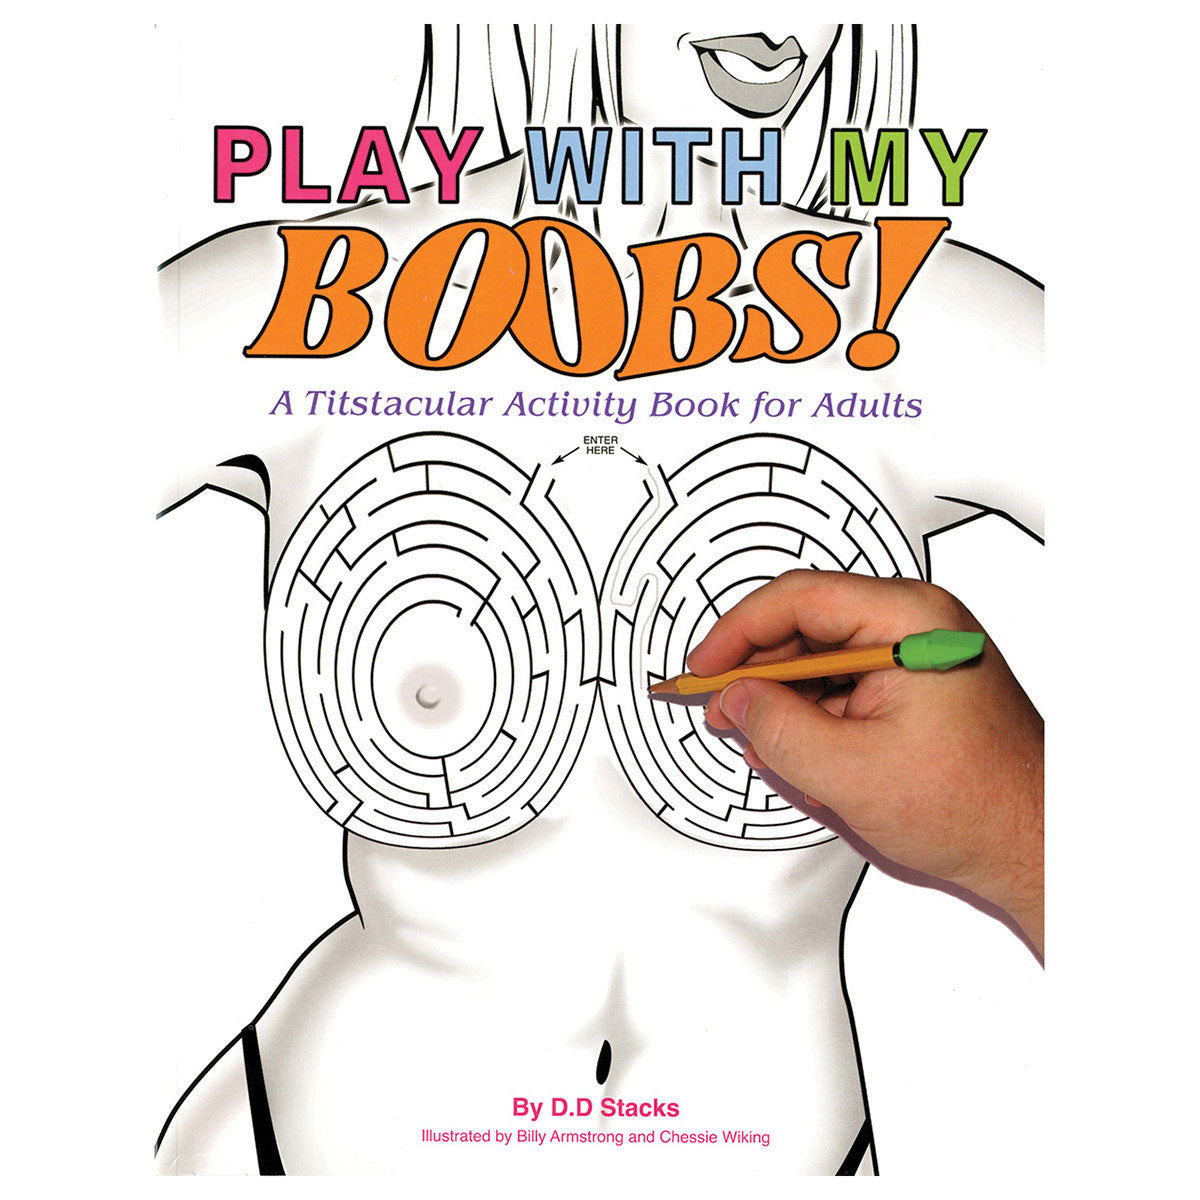 Play with My Boobs! - A Titstacular Activity Book for Adults - Aaron Blake Publishers